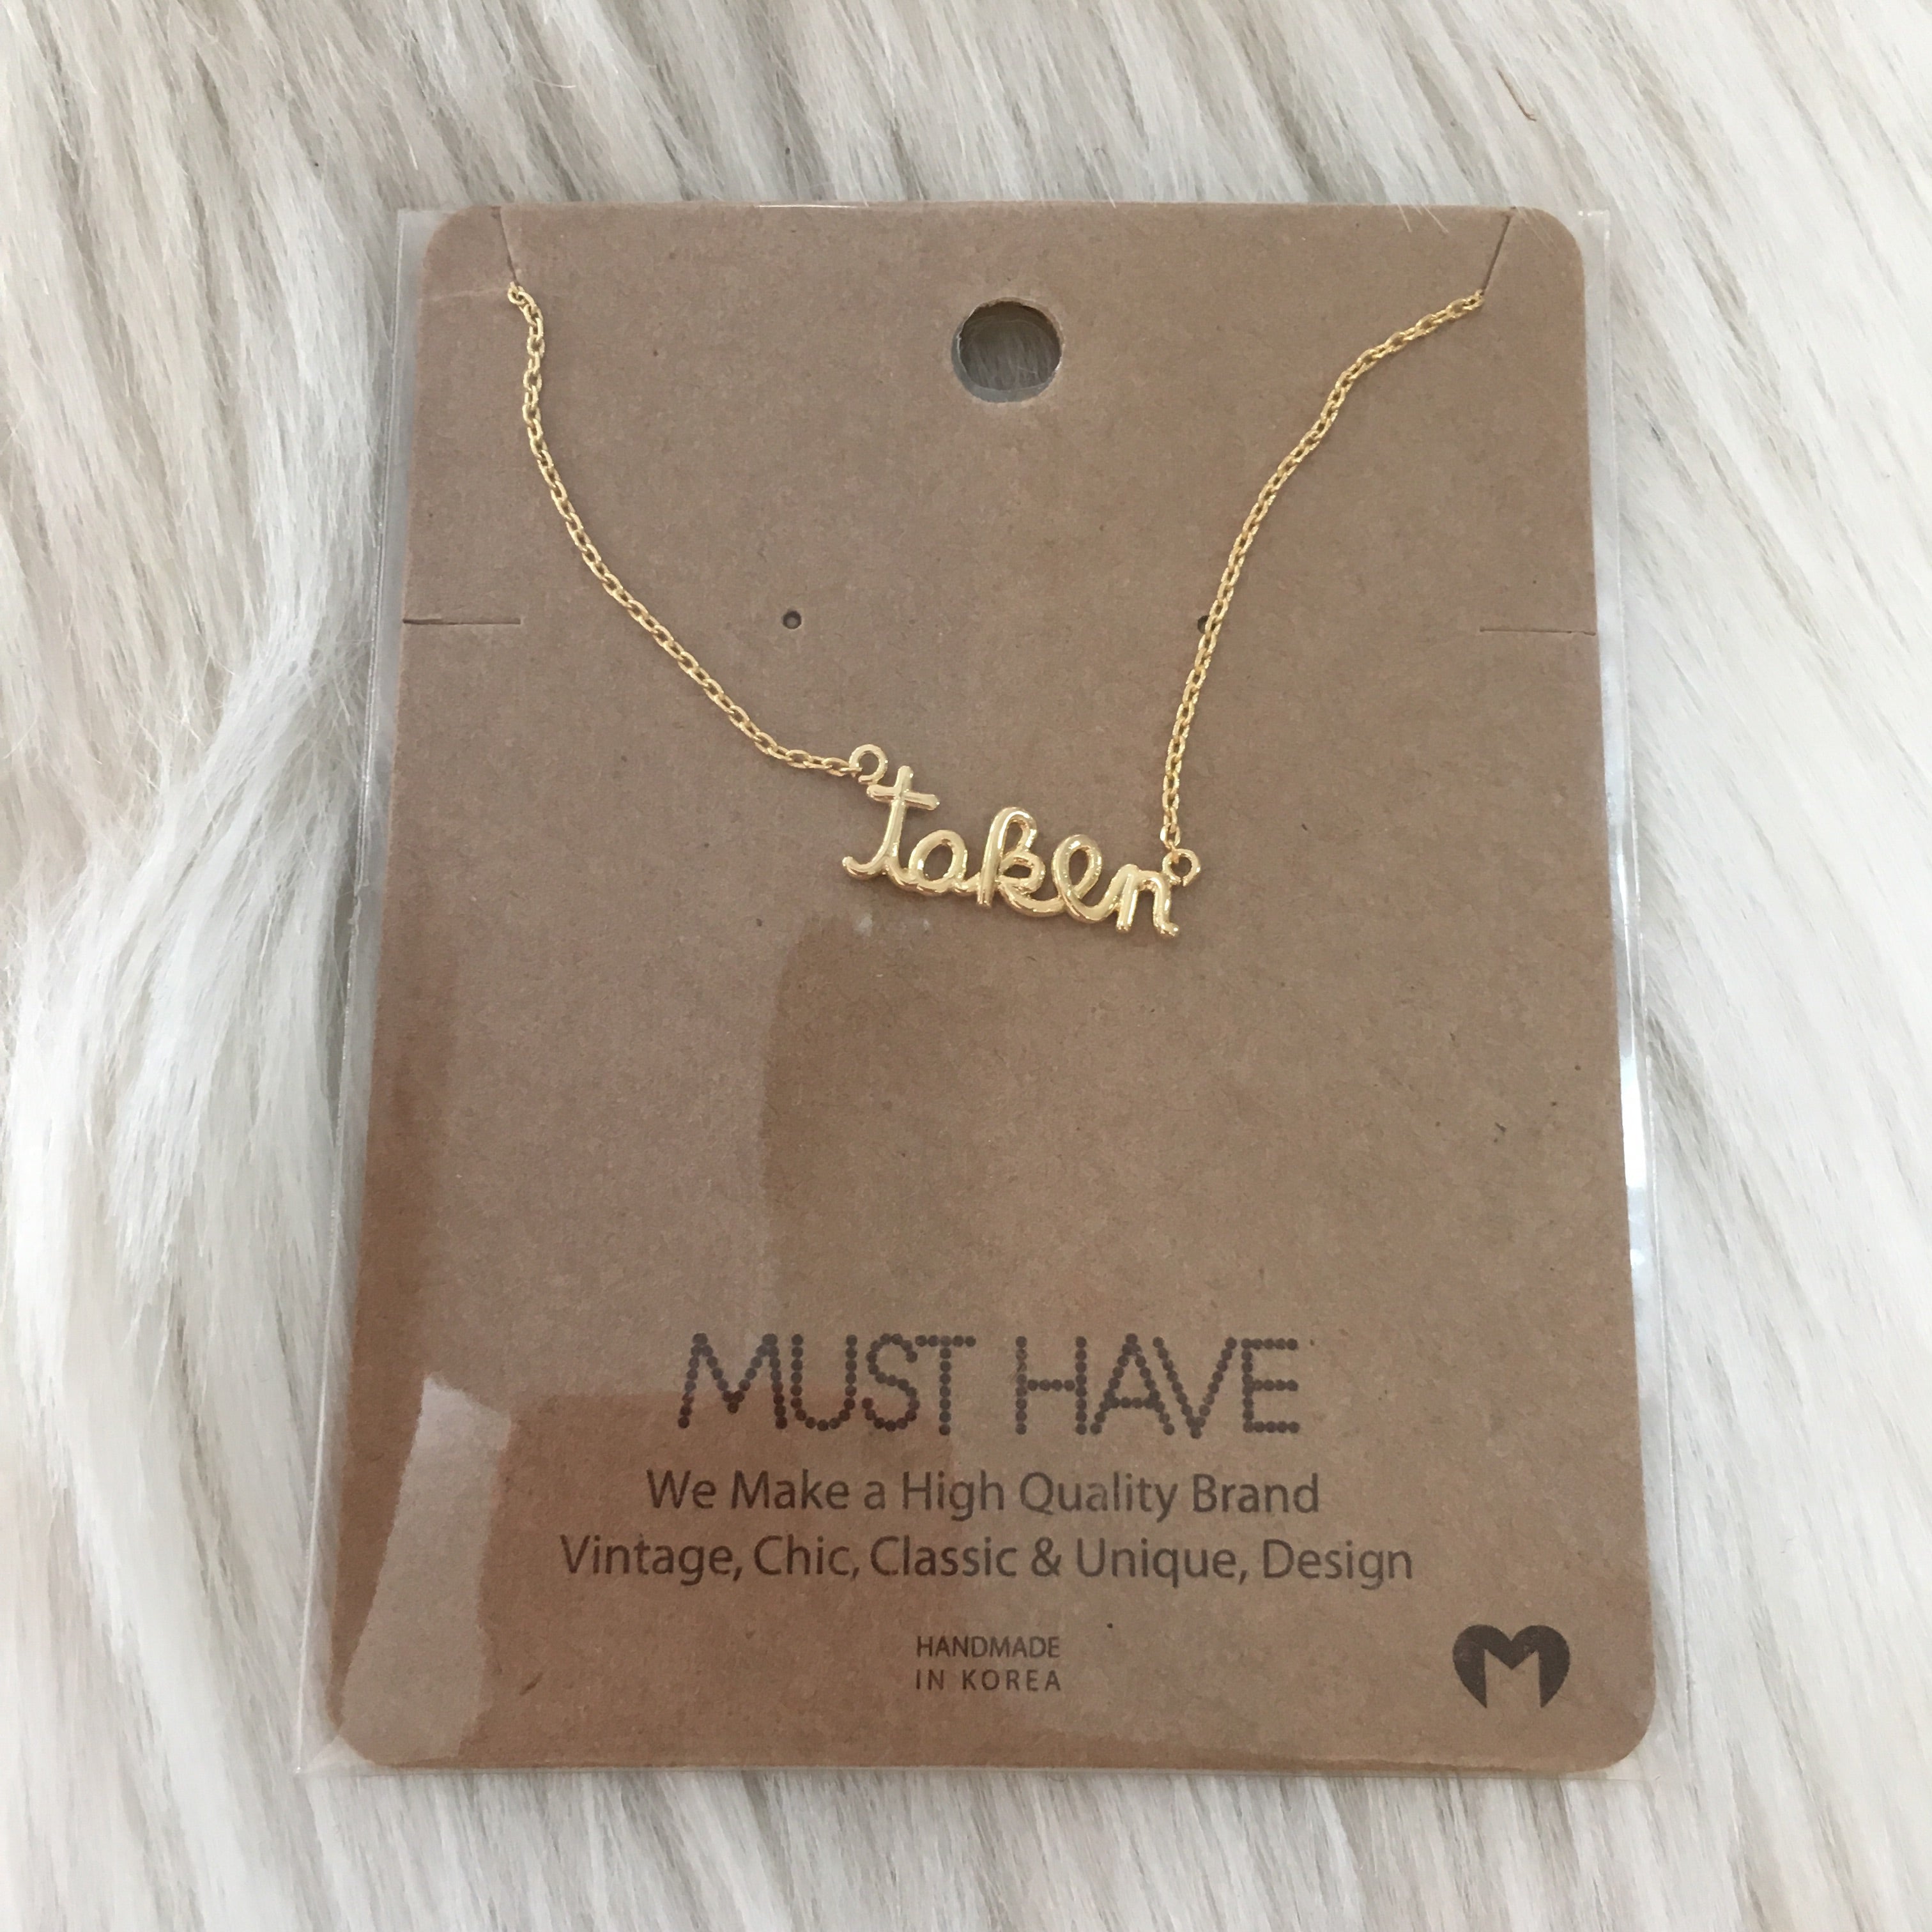 MUST HAVE: TAKEN NECKLACE